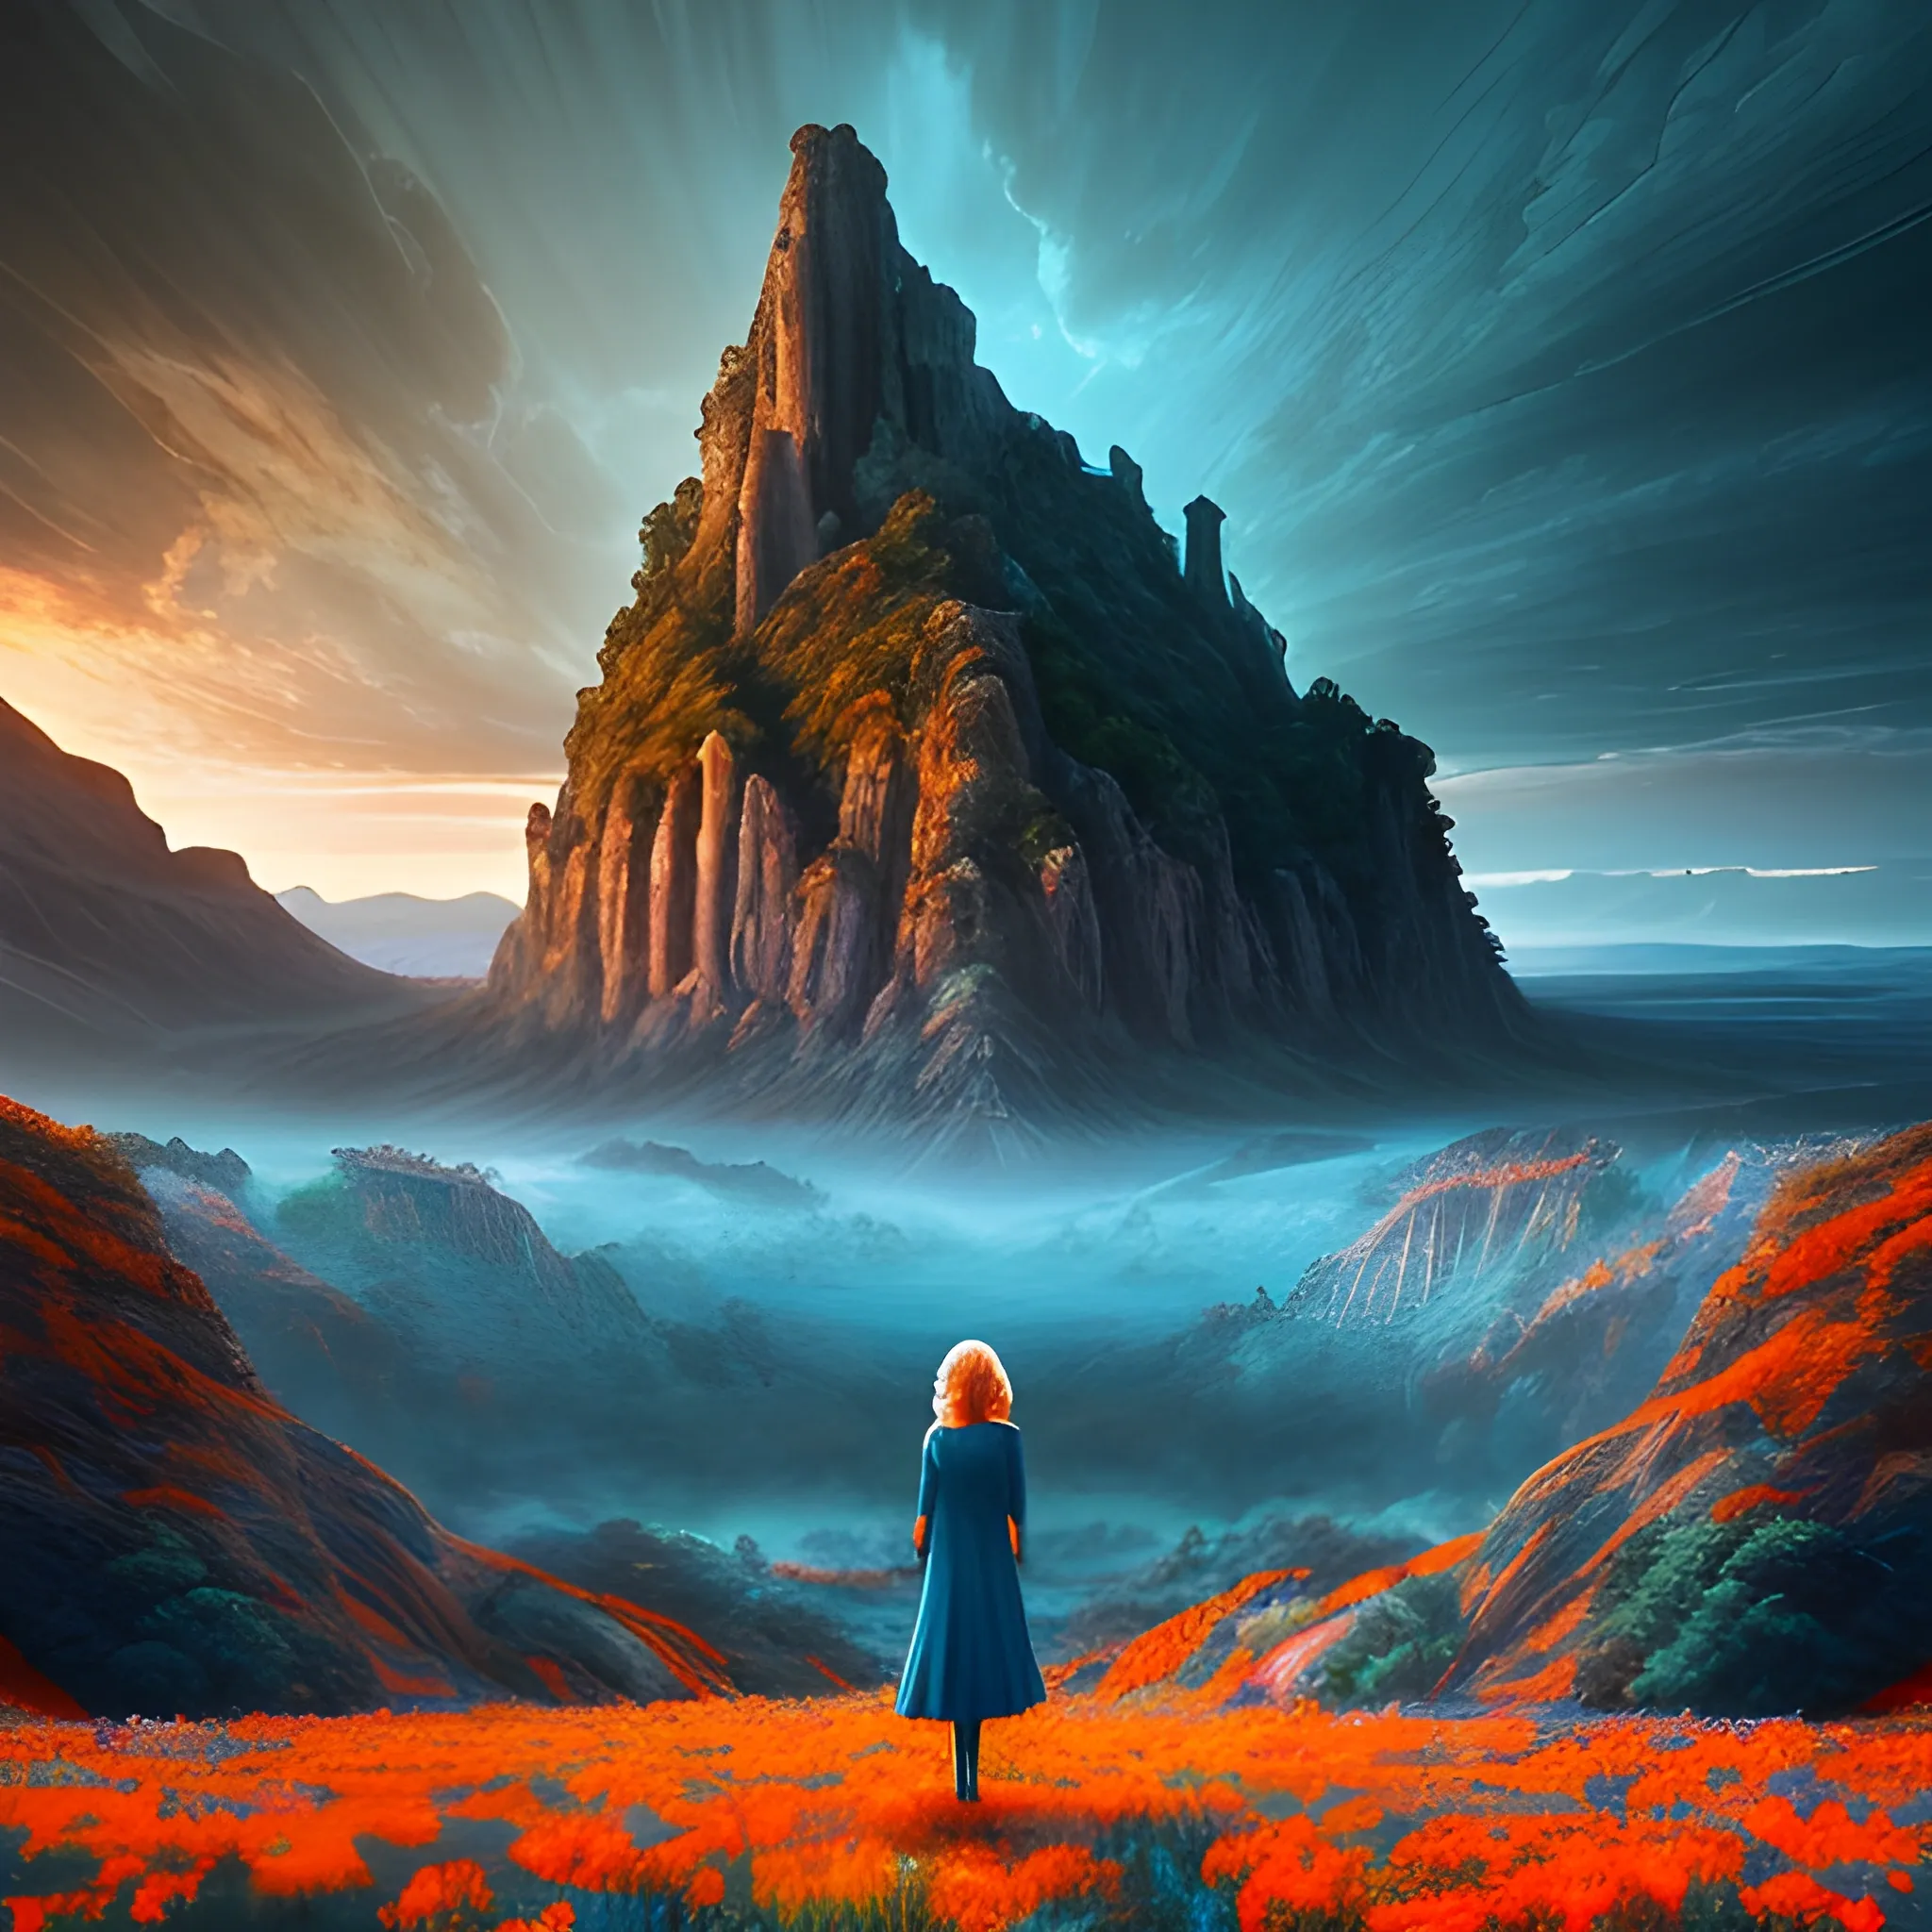 a beautiful landscape photo inspired by arcadia, cinematic atmospheric masterpiece, award winning, hyperdetailed, fantastic, wonderful with a mid-aged modern looking woman with mid-long hair looking at this scenary knowing she is happy after that life has made her strong, with blue and orange tones.

